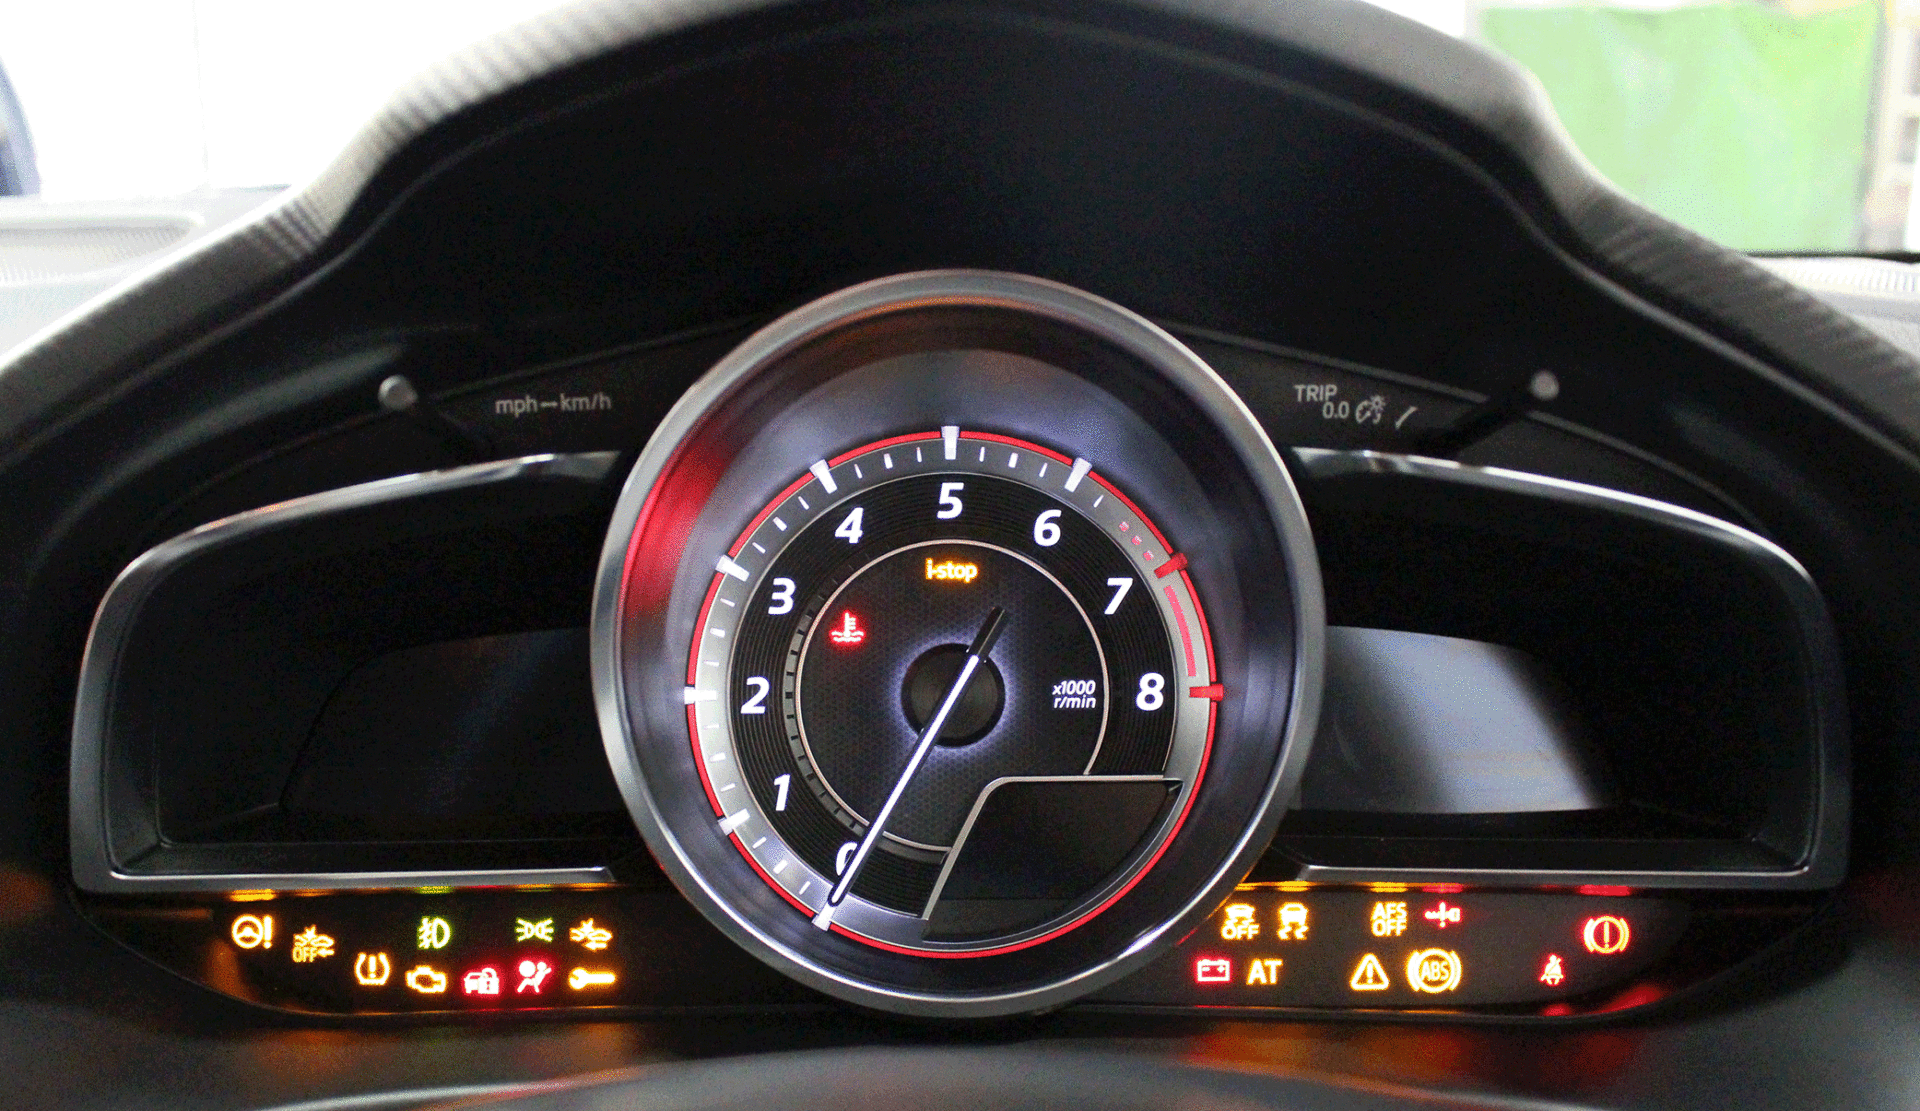 Car Dashboard Warning Lights – What do they mean?